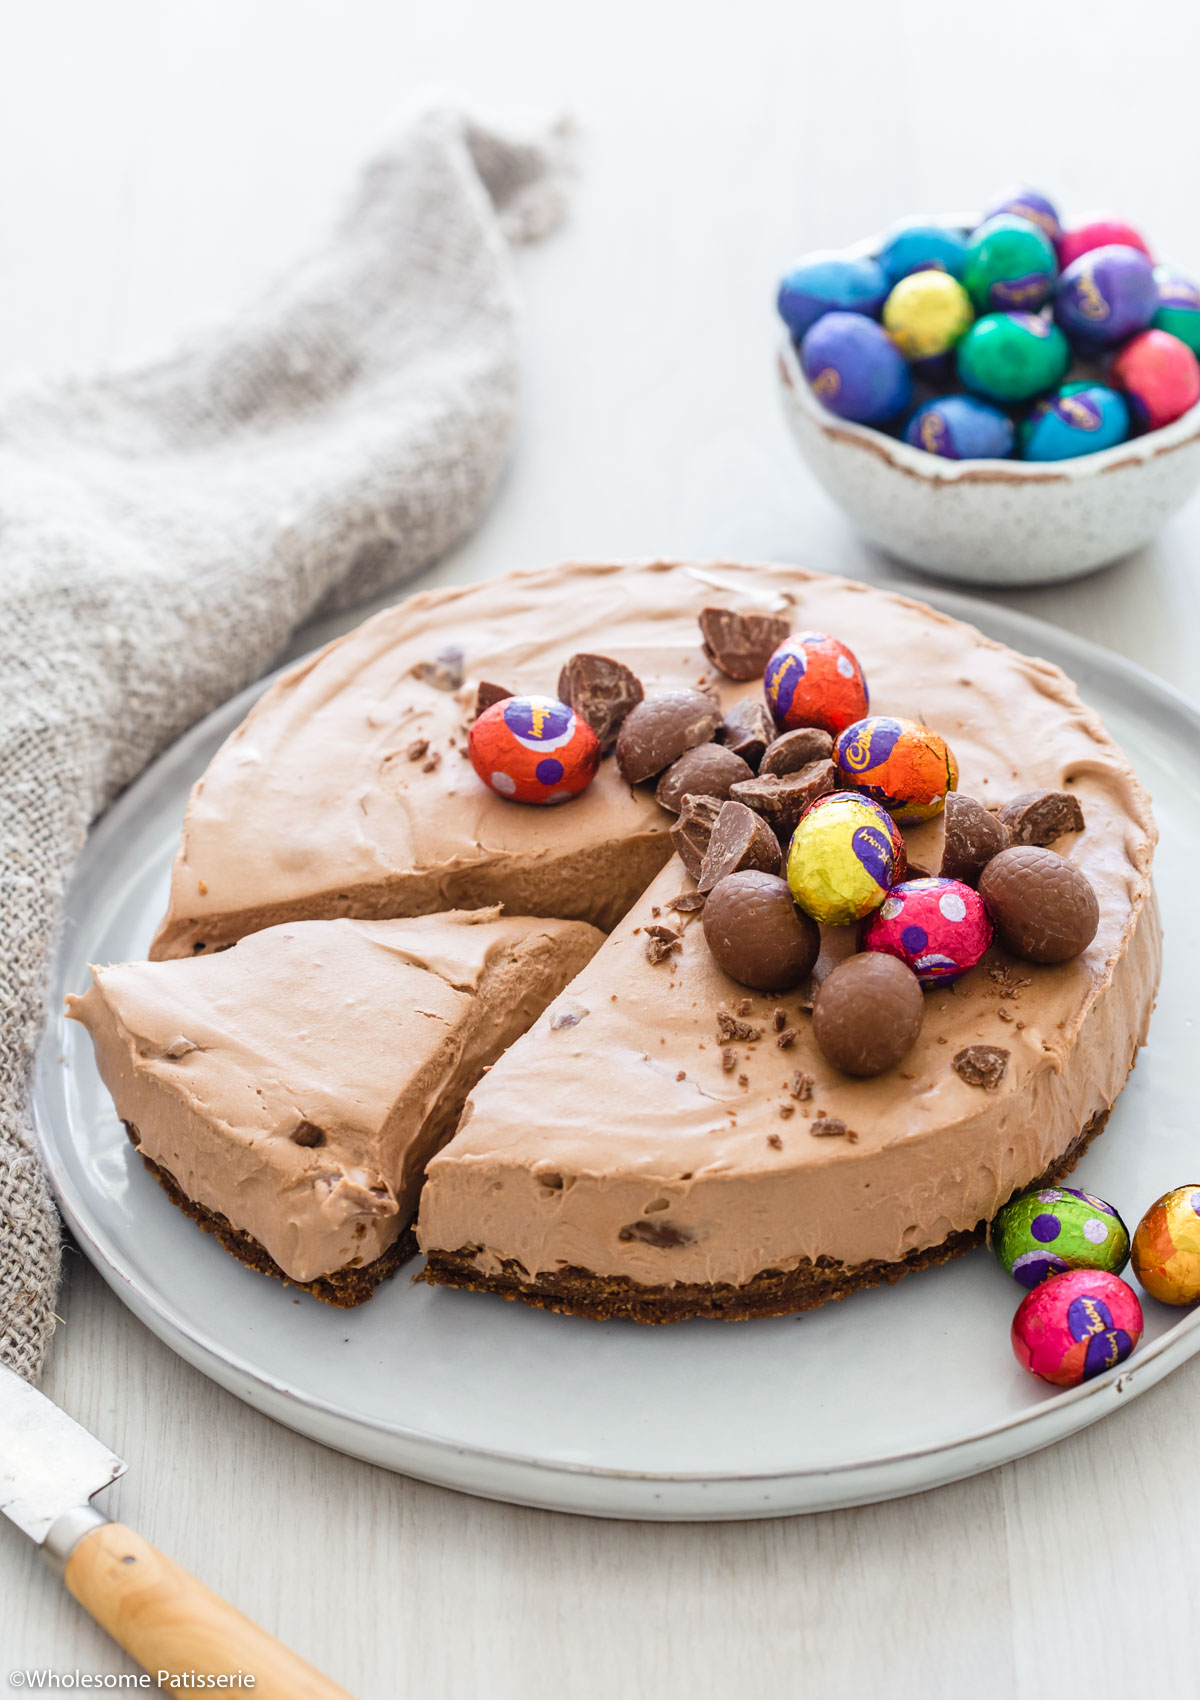 No Bake Easter Egg Nutella Cheesecake on plate decorated with small Easter eggs.